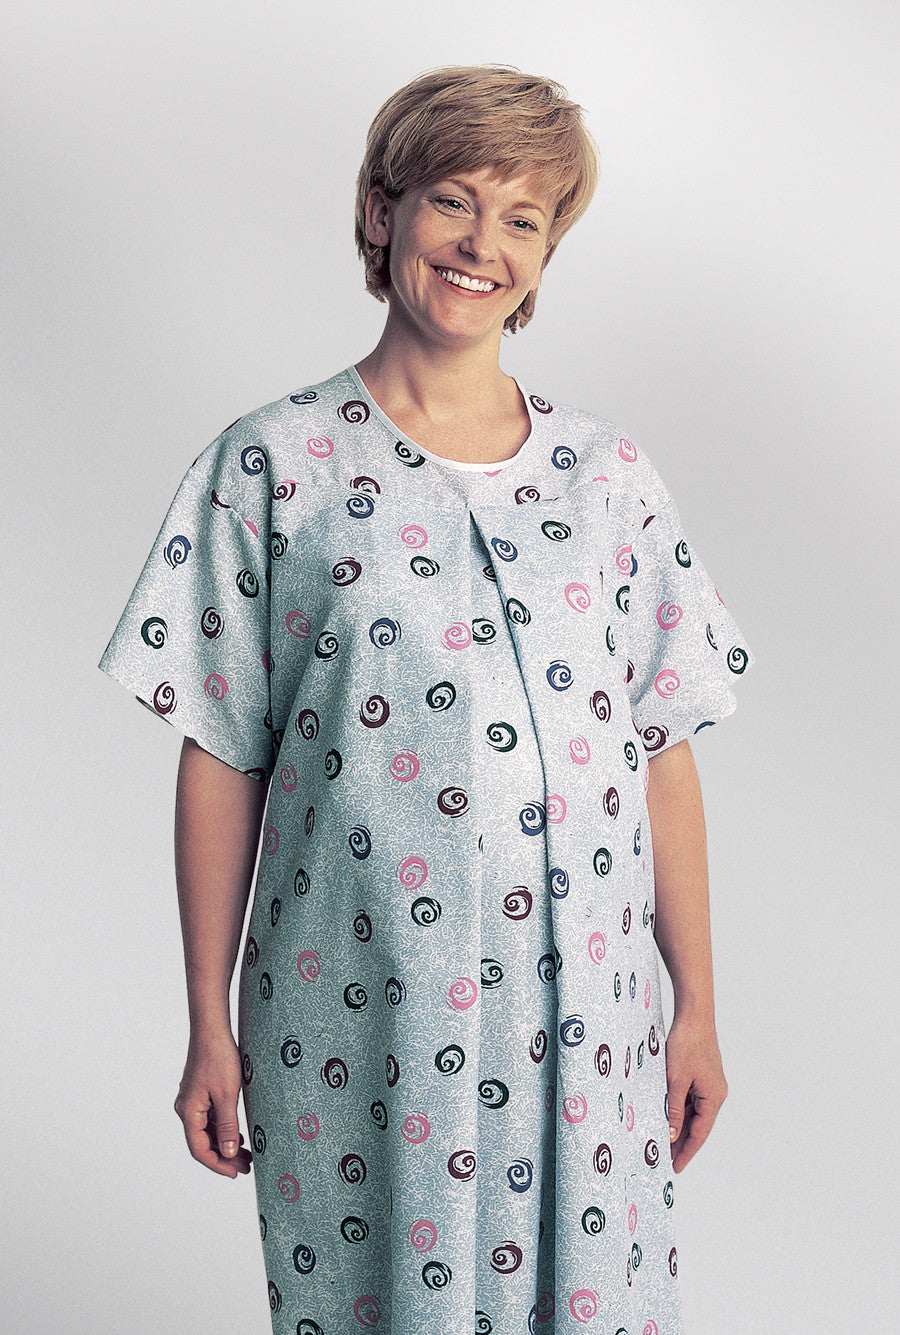 Amelia Floral 3 in 1 Maternity Labor & Delivery Hospital Gown Bag Gift |  Delivery hospital gown, Labor gowns, Delivery gown